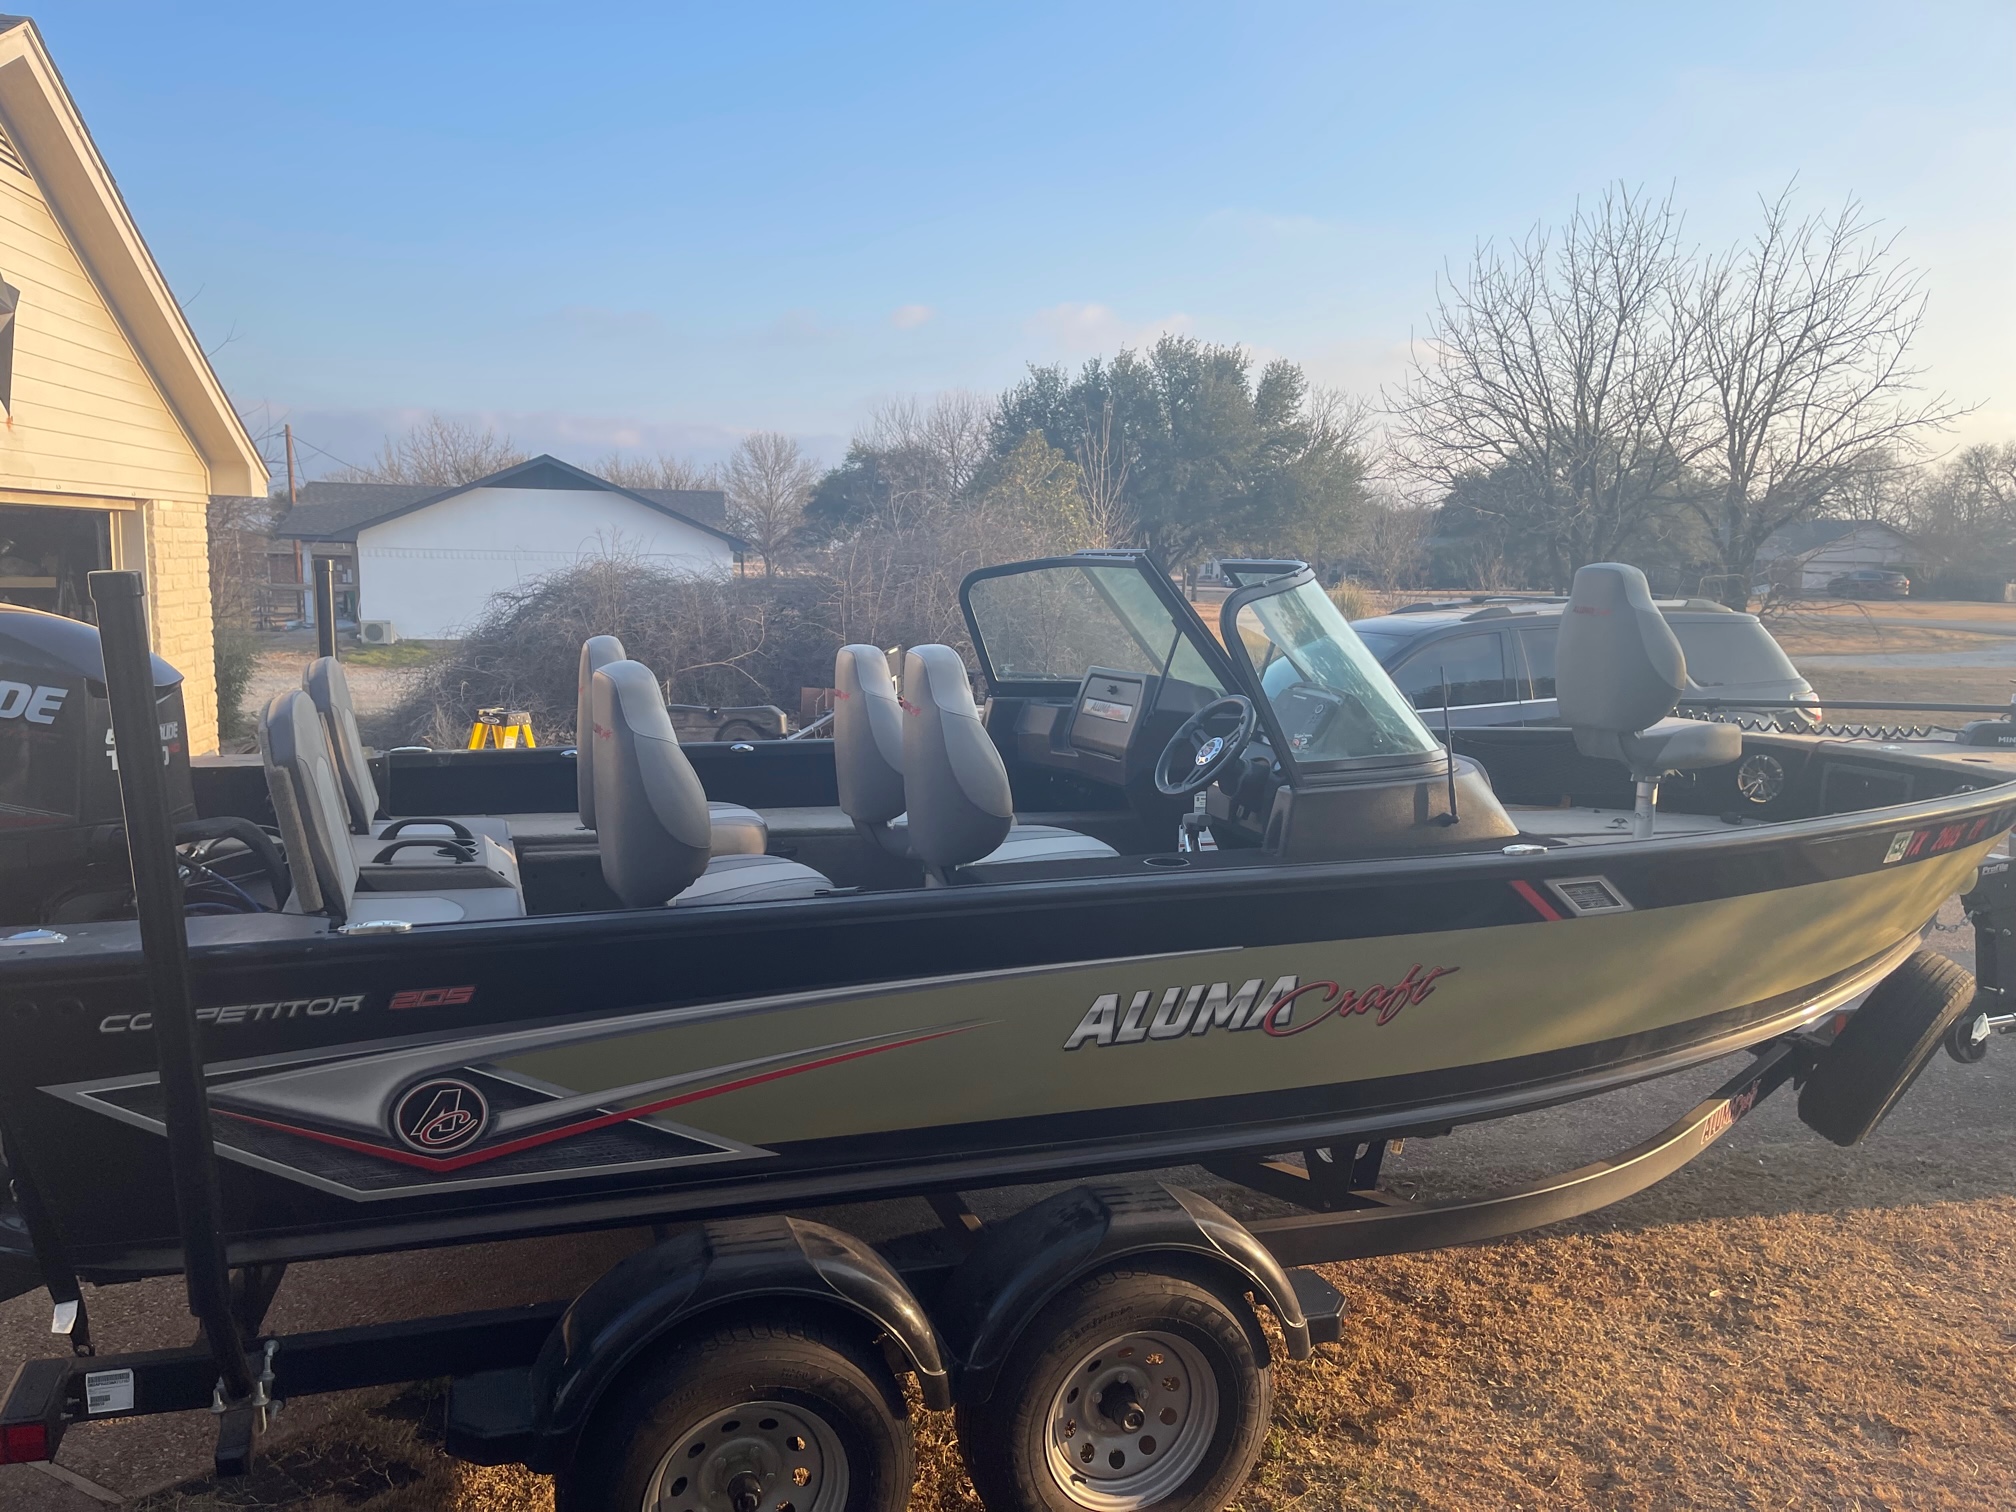 2020 Alumacraft 205 Competitor Power boat for sale in Waco, TX - image 5 